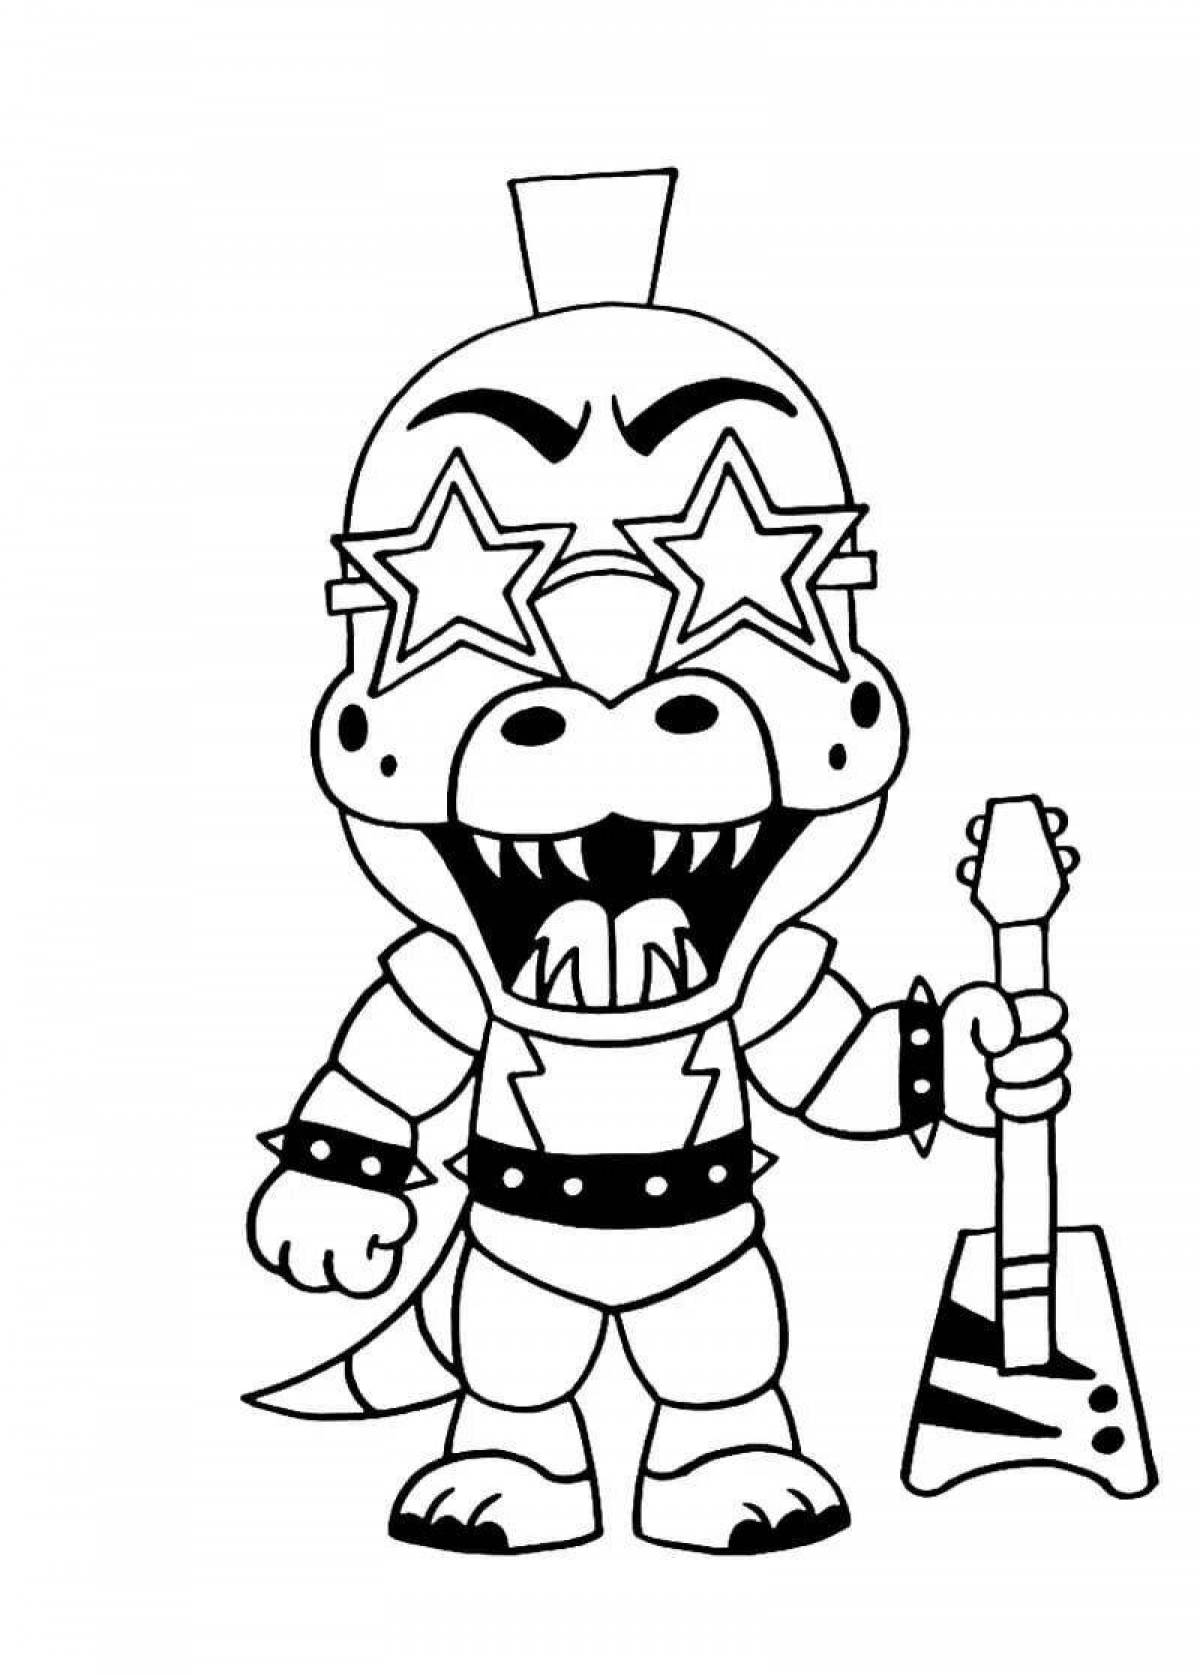 Fnaf Monty's deluxe coloring book